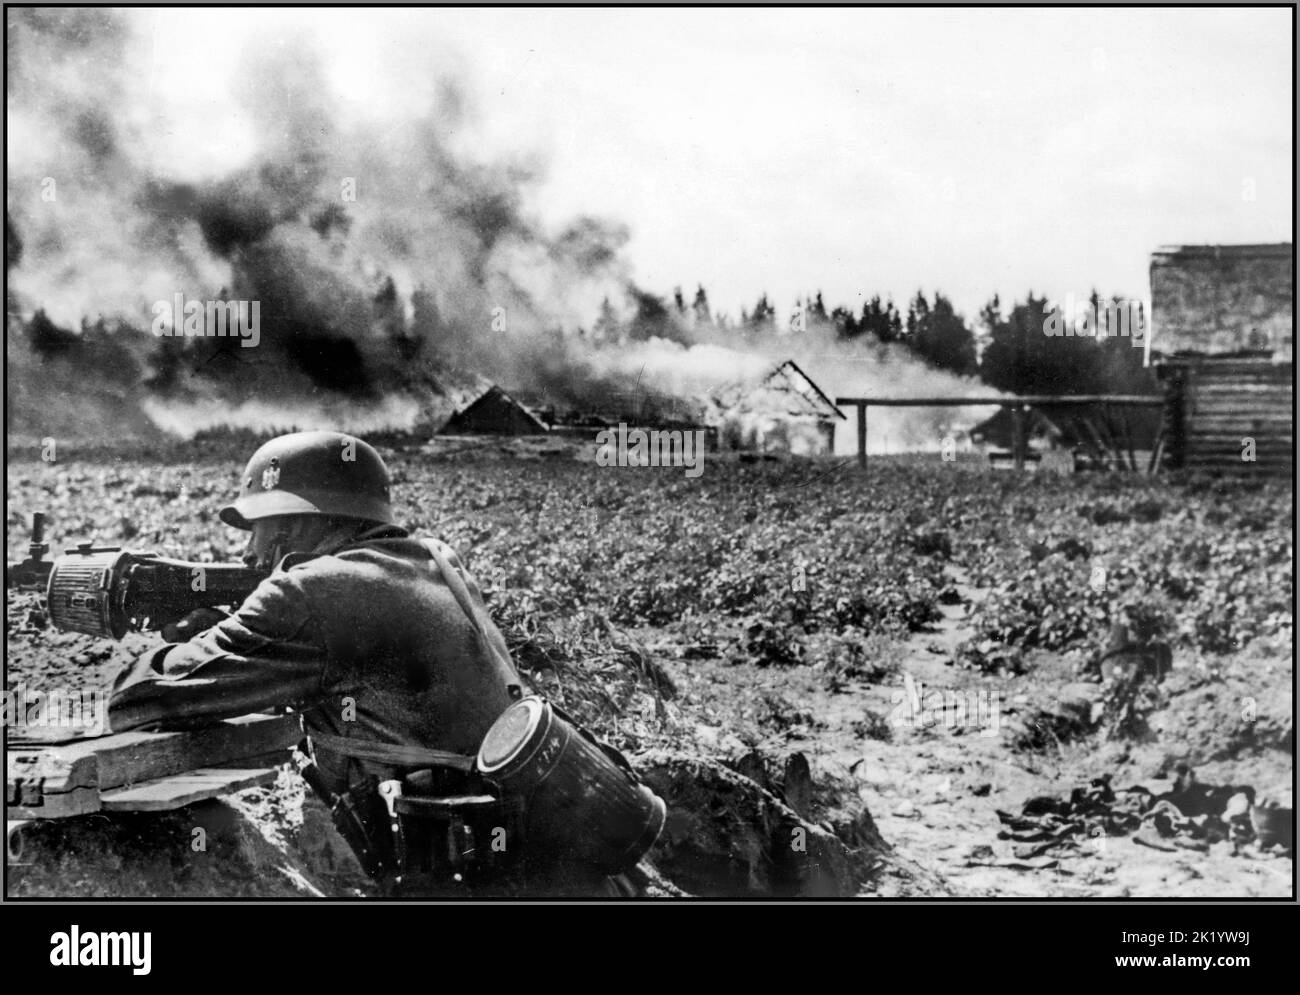 WW2 OPERATION BARBAROSSA  Counter-partisan action by Whermacht Nazi German soldiers on the Eastern Front. In the foreground, a German soldier in a trench position, firing an MG-34 machine gun with a drum magazine. A burning village in the background. 1941 Stock Photo